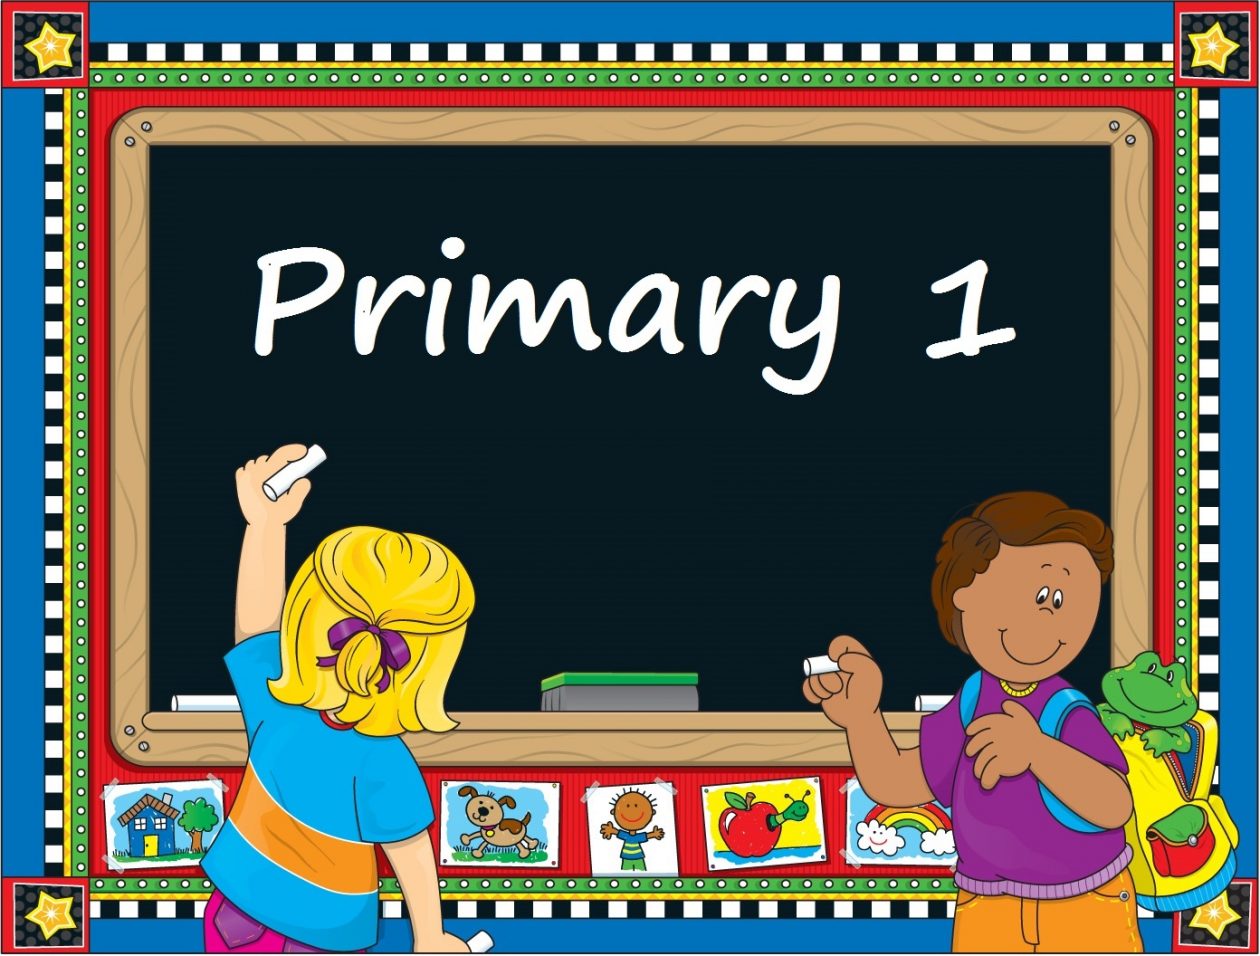 Light Academy Nursery & Primary (Primary One Questions) 2